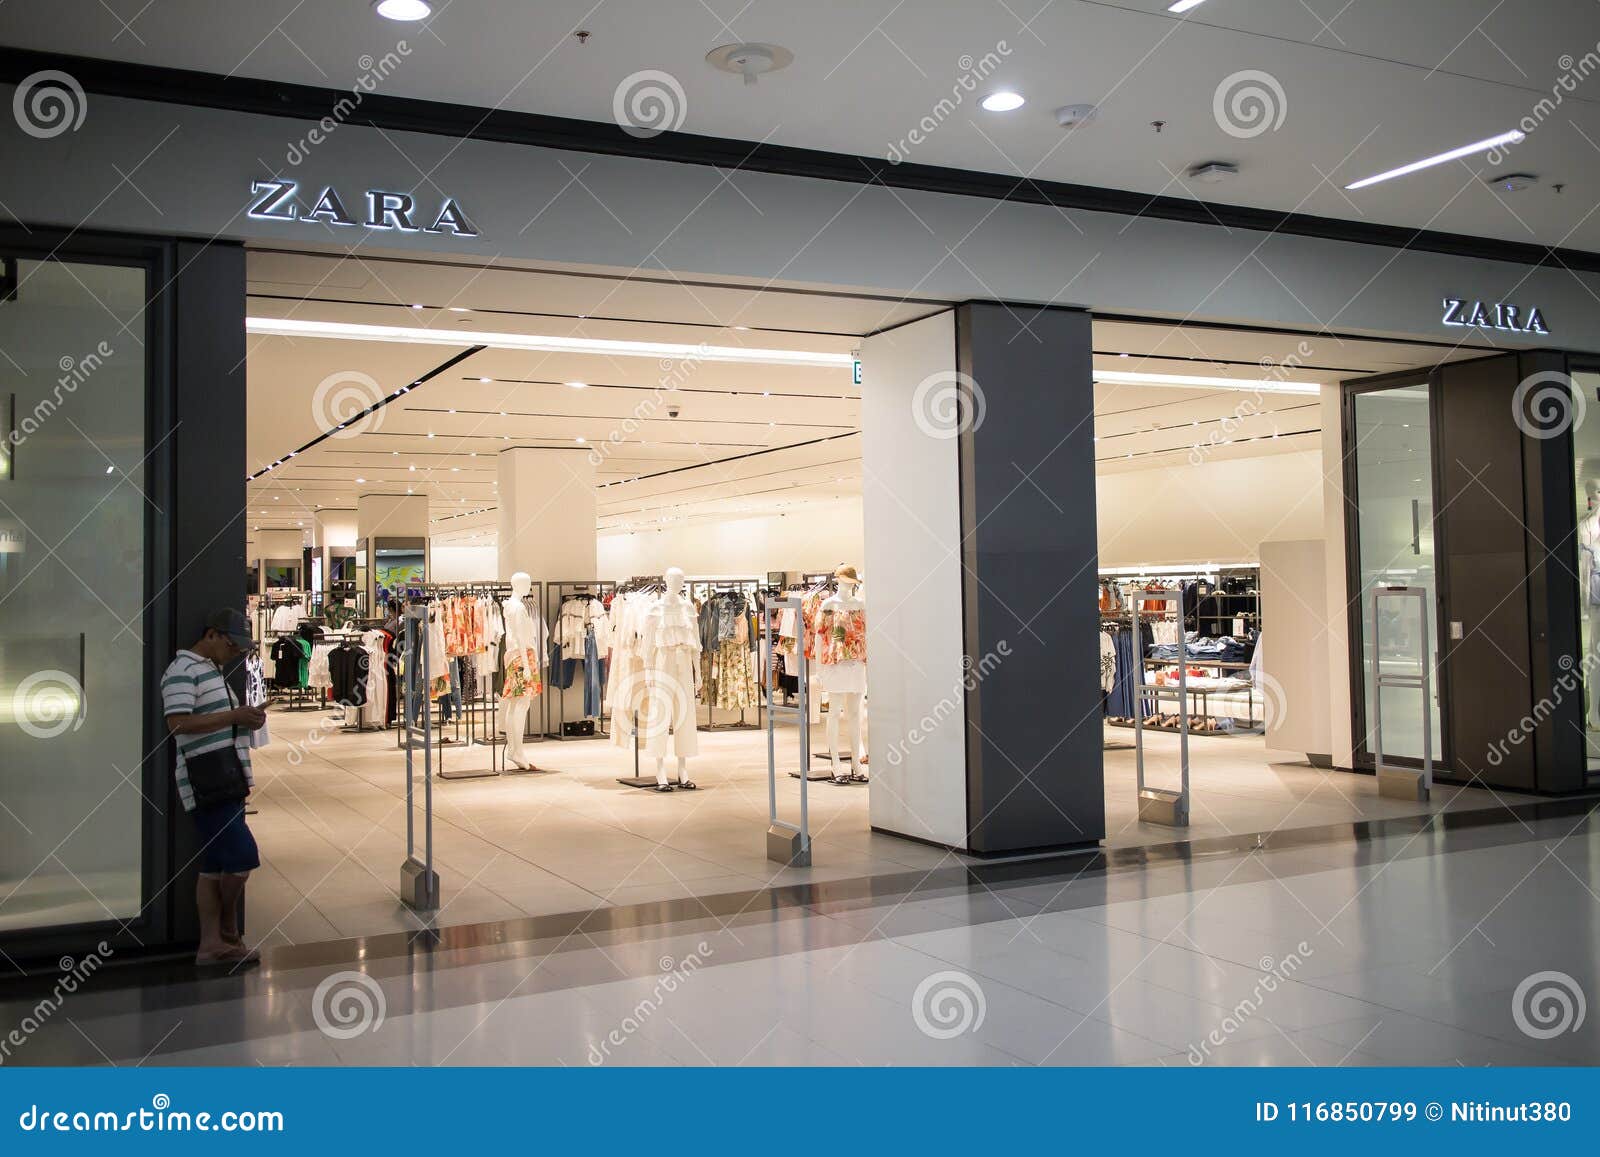 ZARA Shop. Clothing Design and Manufacturing Company, Founded I ...